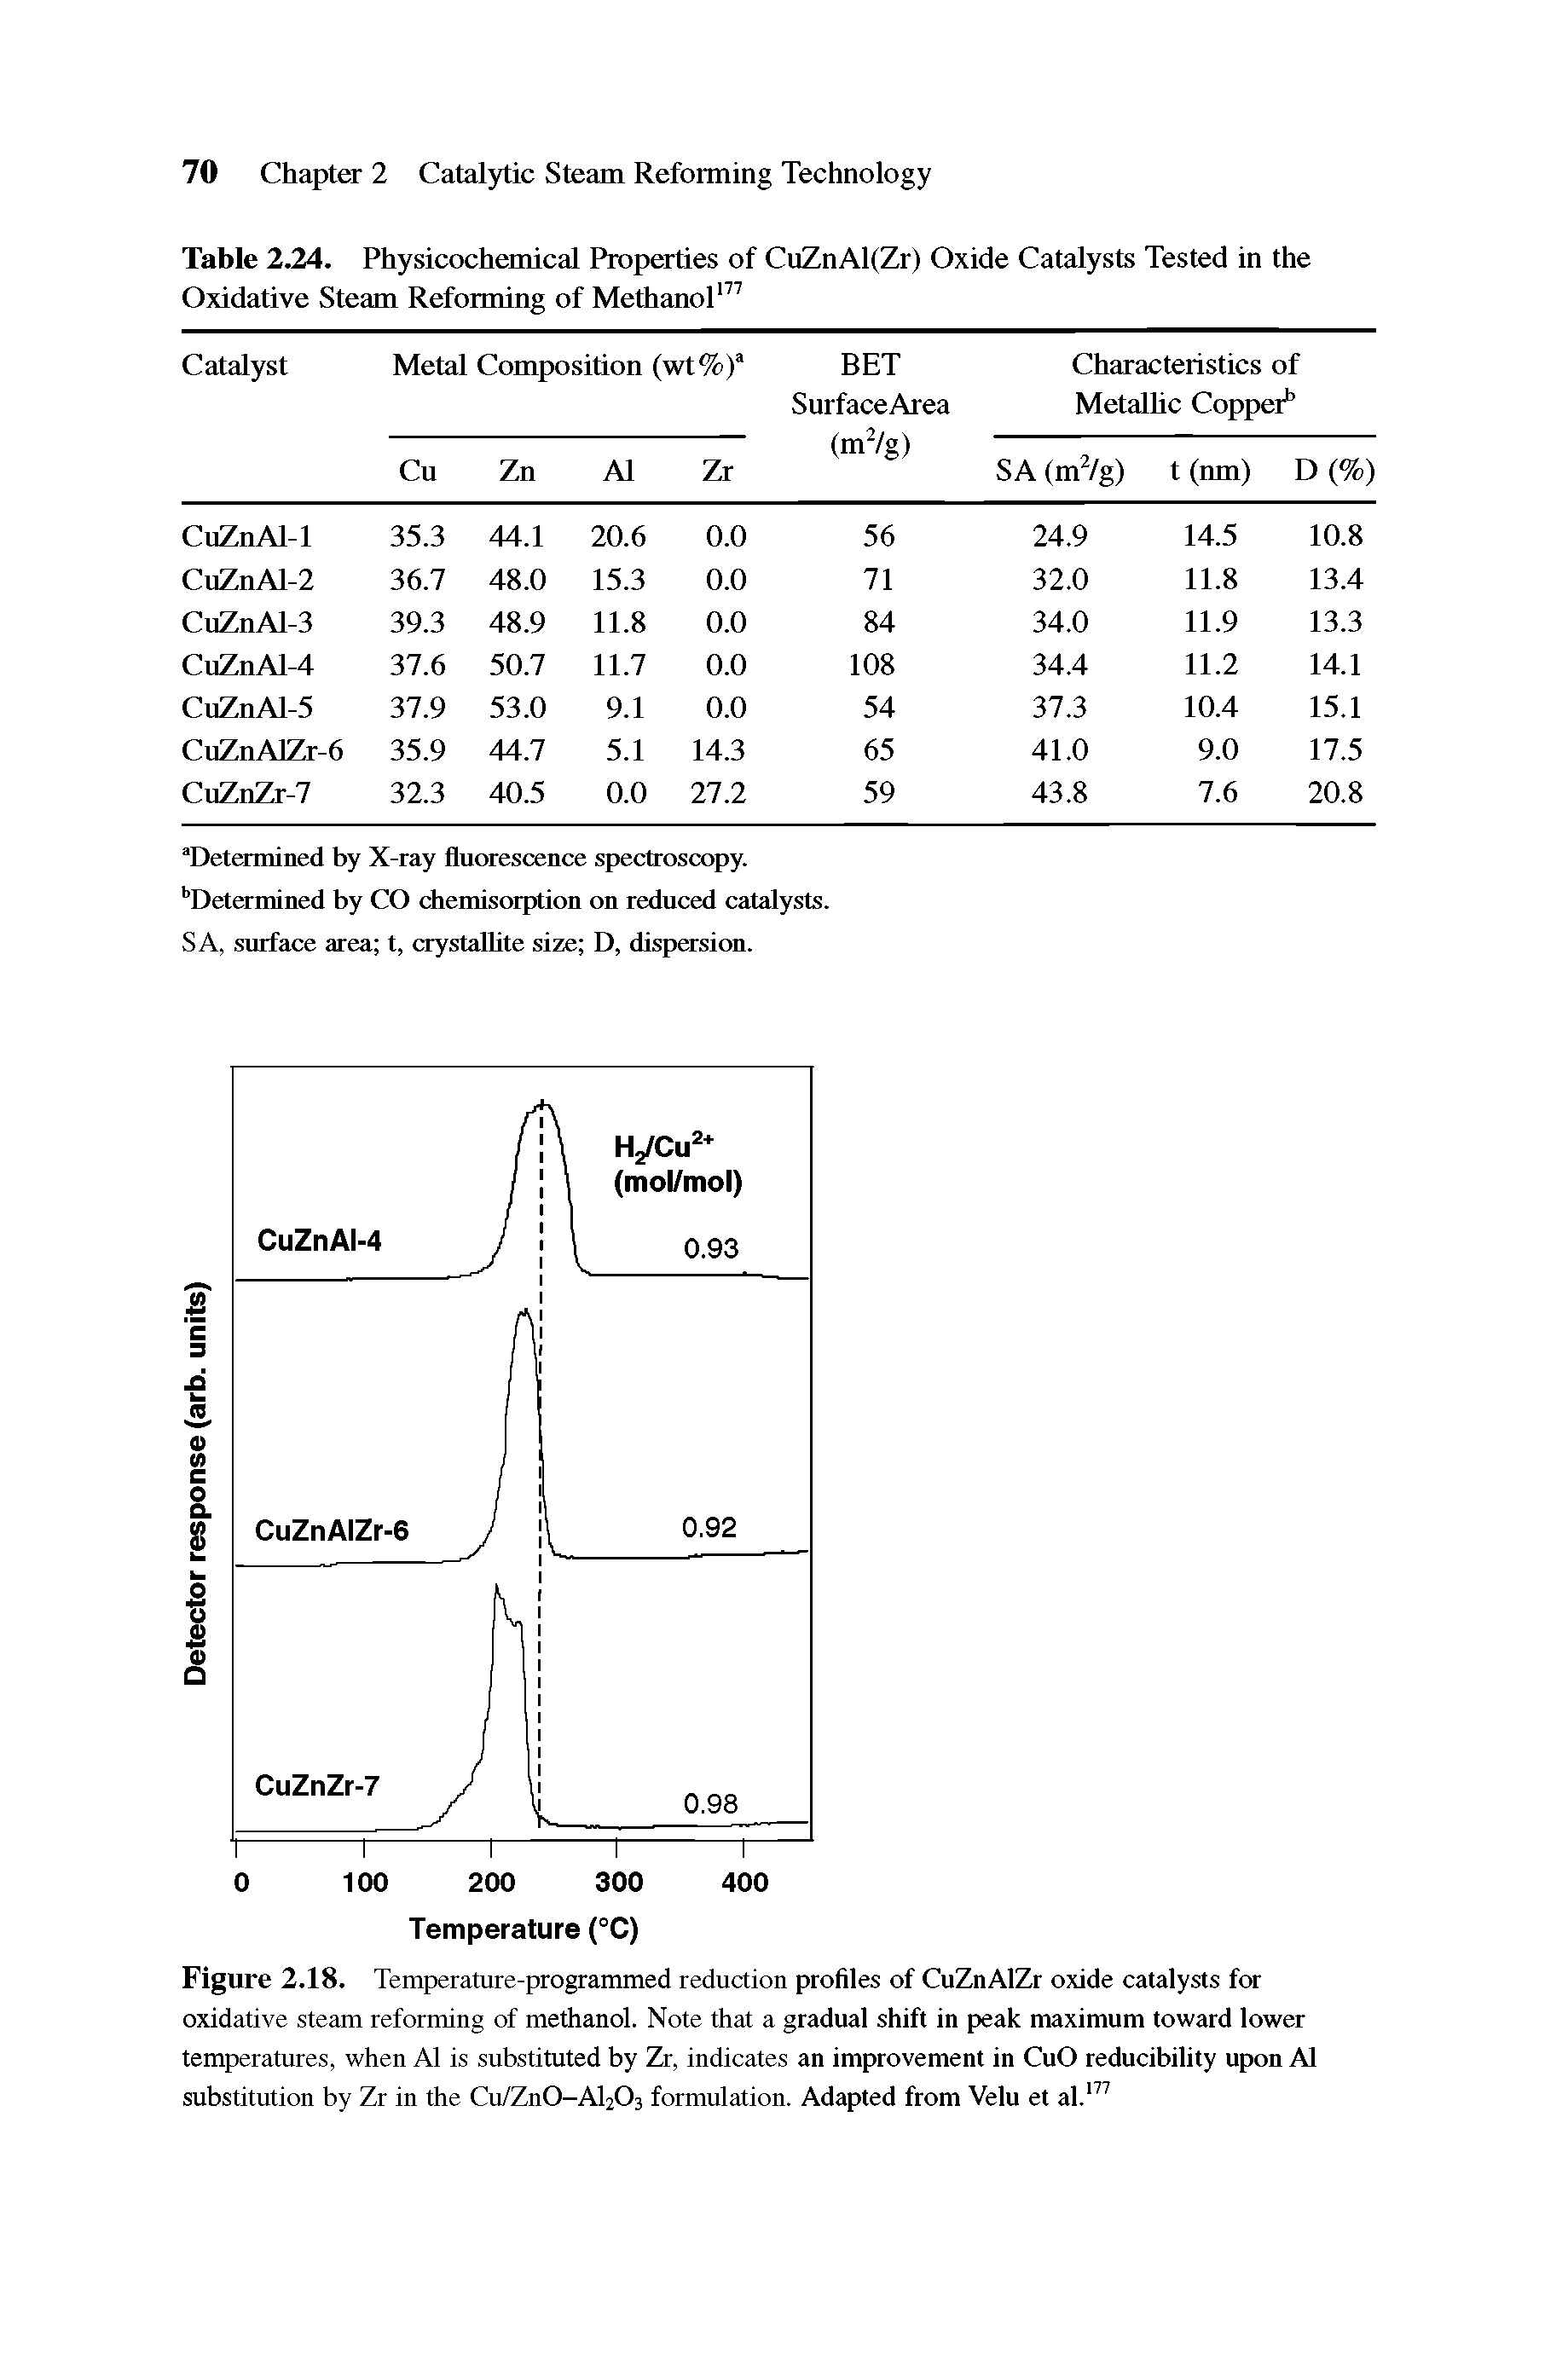 Figure 2.18. Temperature-programmed reduction profiles of CuZnAlZr oxide catalysts for oxidative steam reforming of methanol. Note that a gradual shift in peak maximum toward lower temperatures, when A1 is substituted by Zr, indicates an improvement in CuO reducibility upon A1 substitution by Zr in the Cu/Zn0-Al203 formulation. Adapted from Velu et al.177...